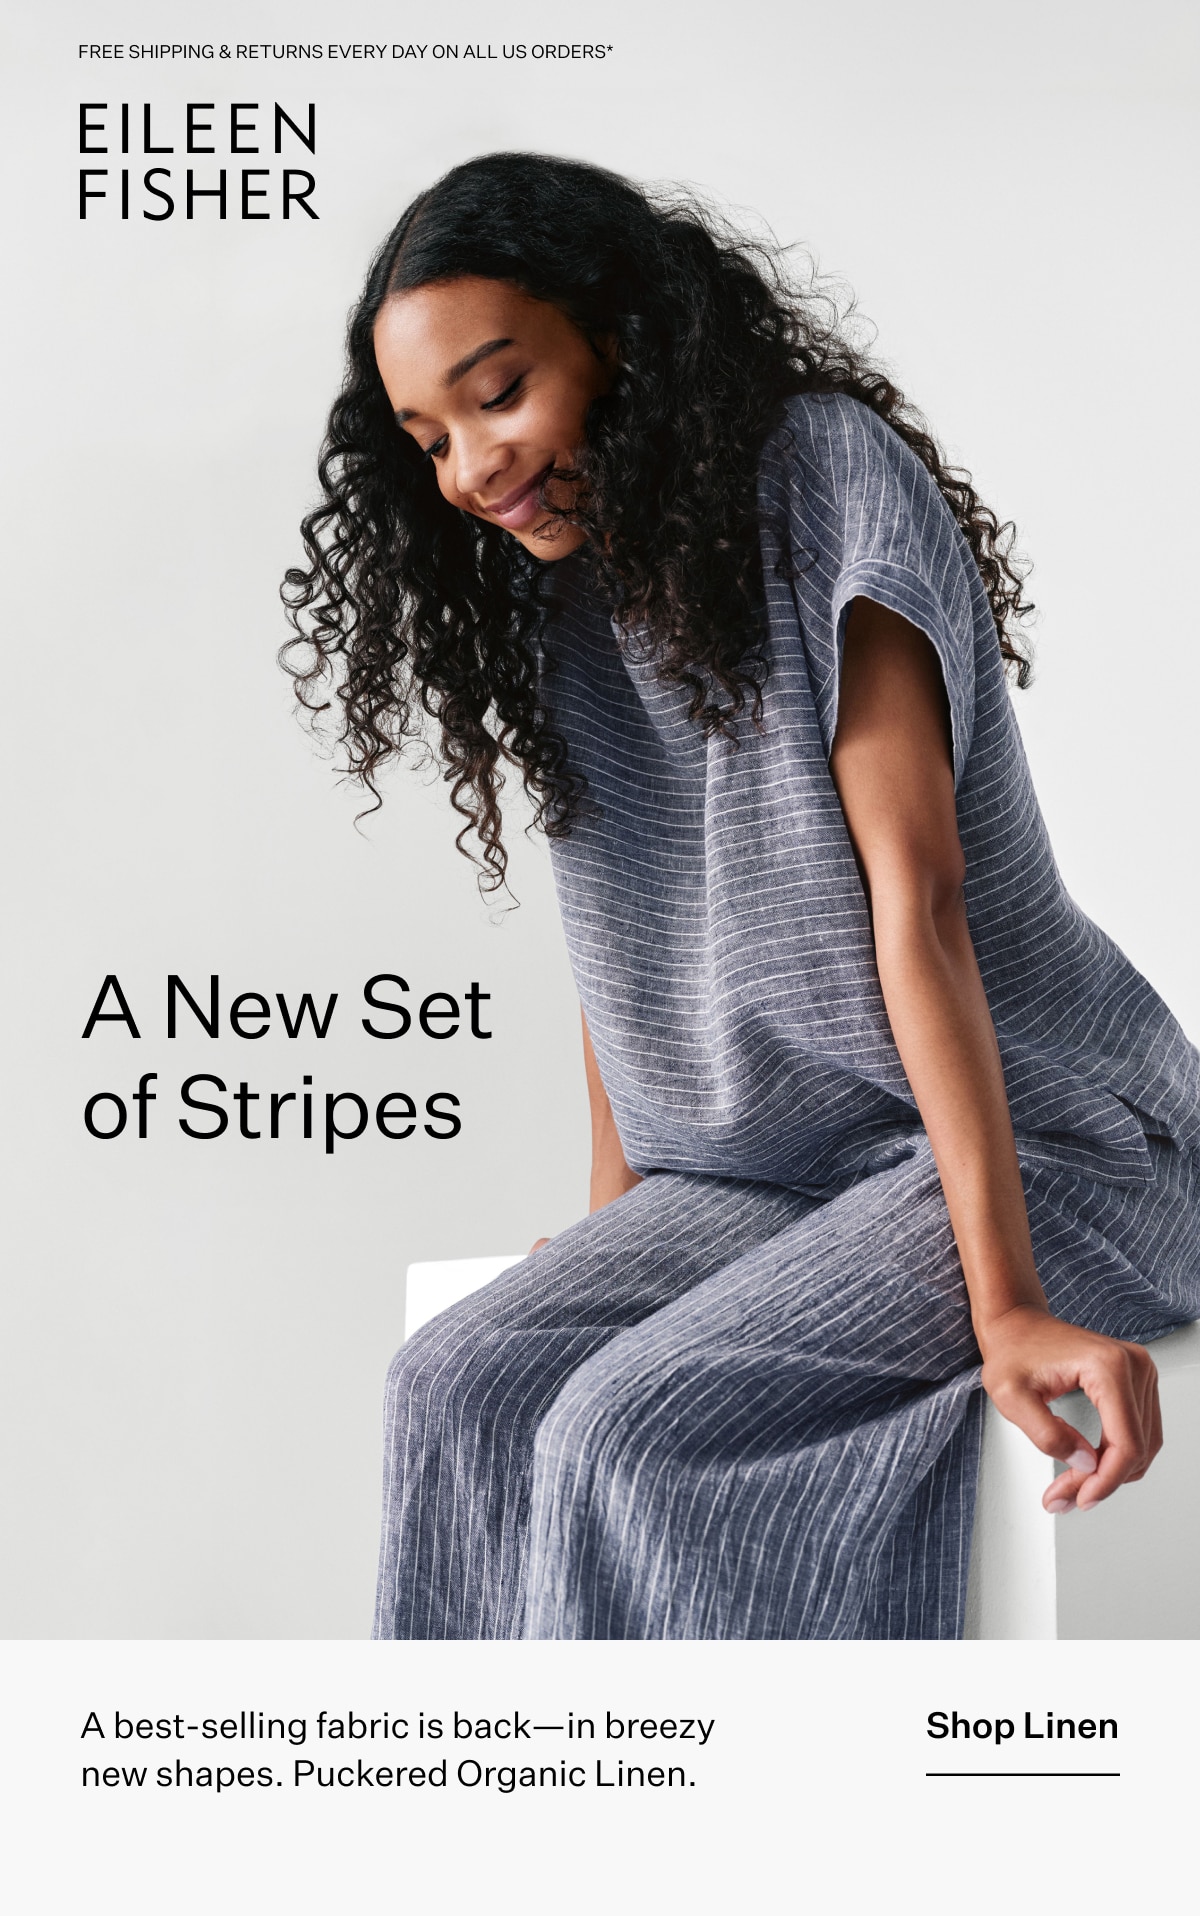 EILEEN FISHER - A New Set of Stripes. A best-selling fabric is back - in breezy new shapes. Puckered Organic Linen. Shop Linen